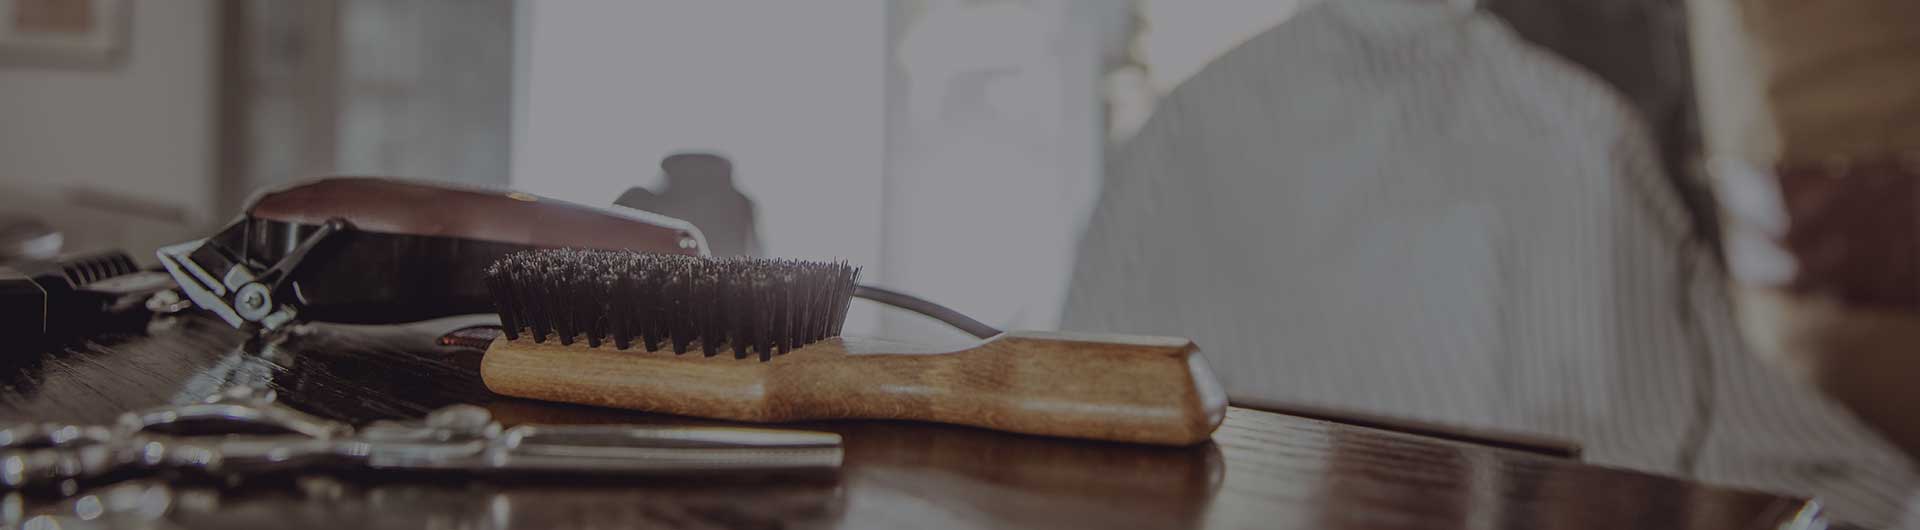 Barbershop tools including a brush, scissors, and a comb on a table.